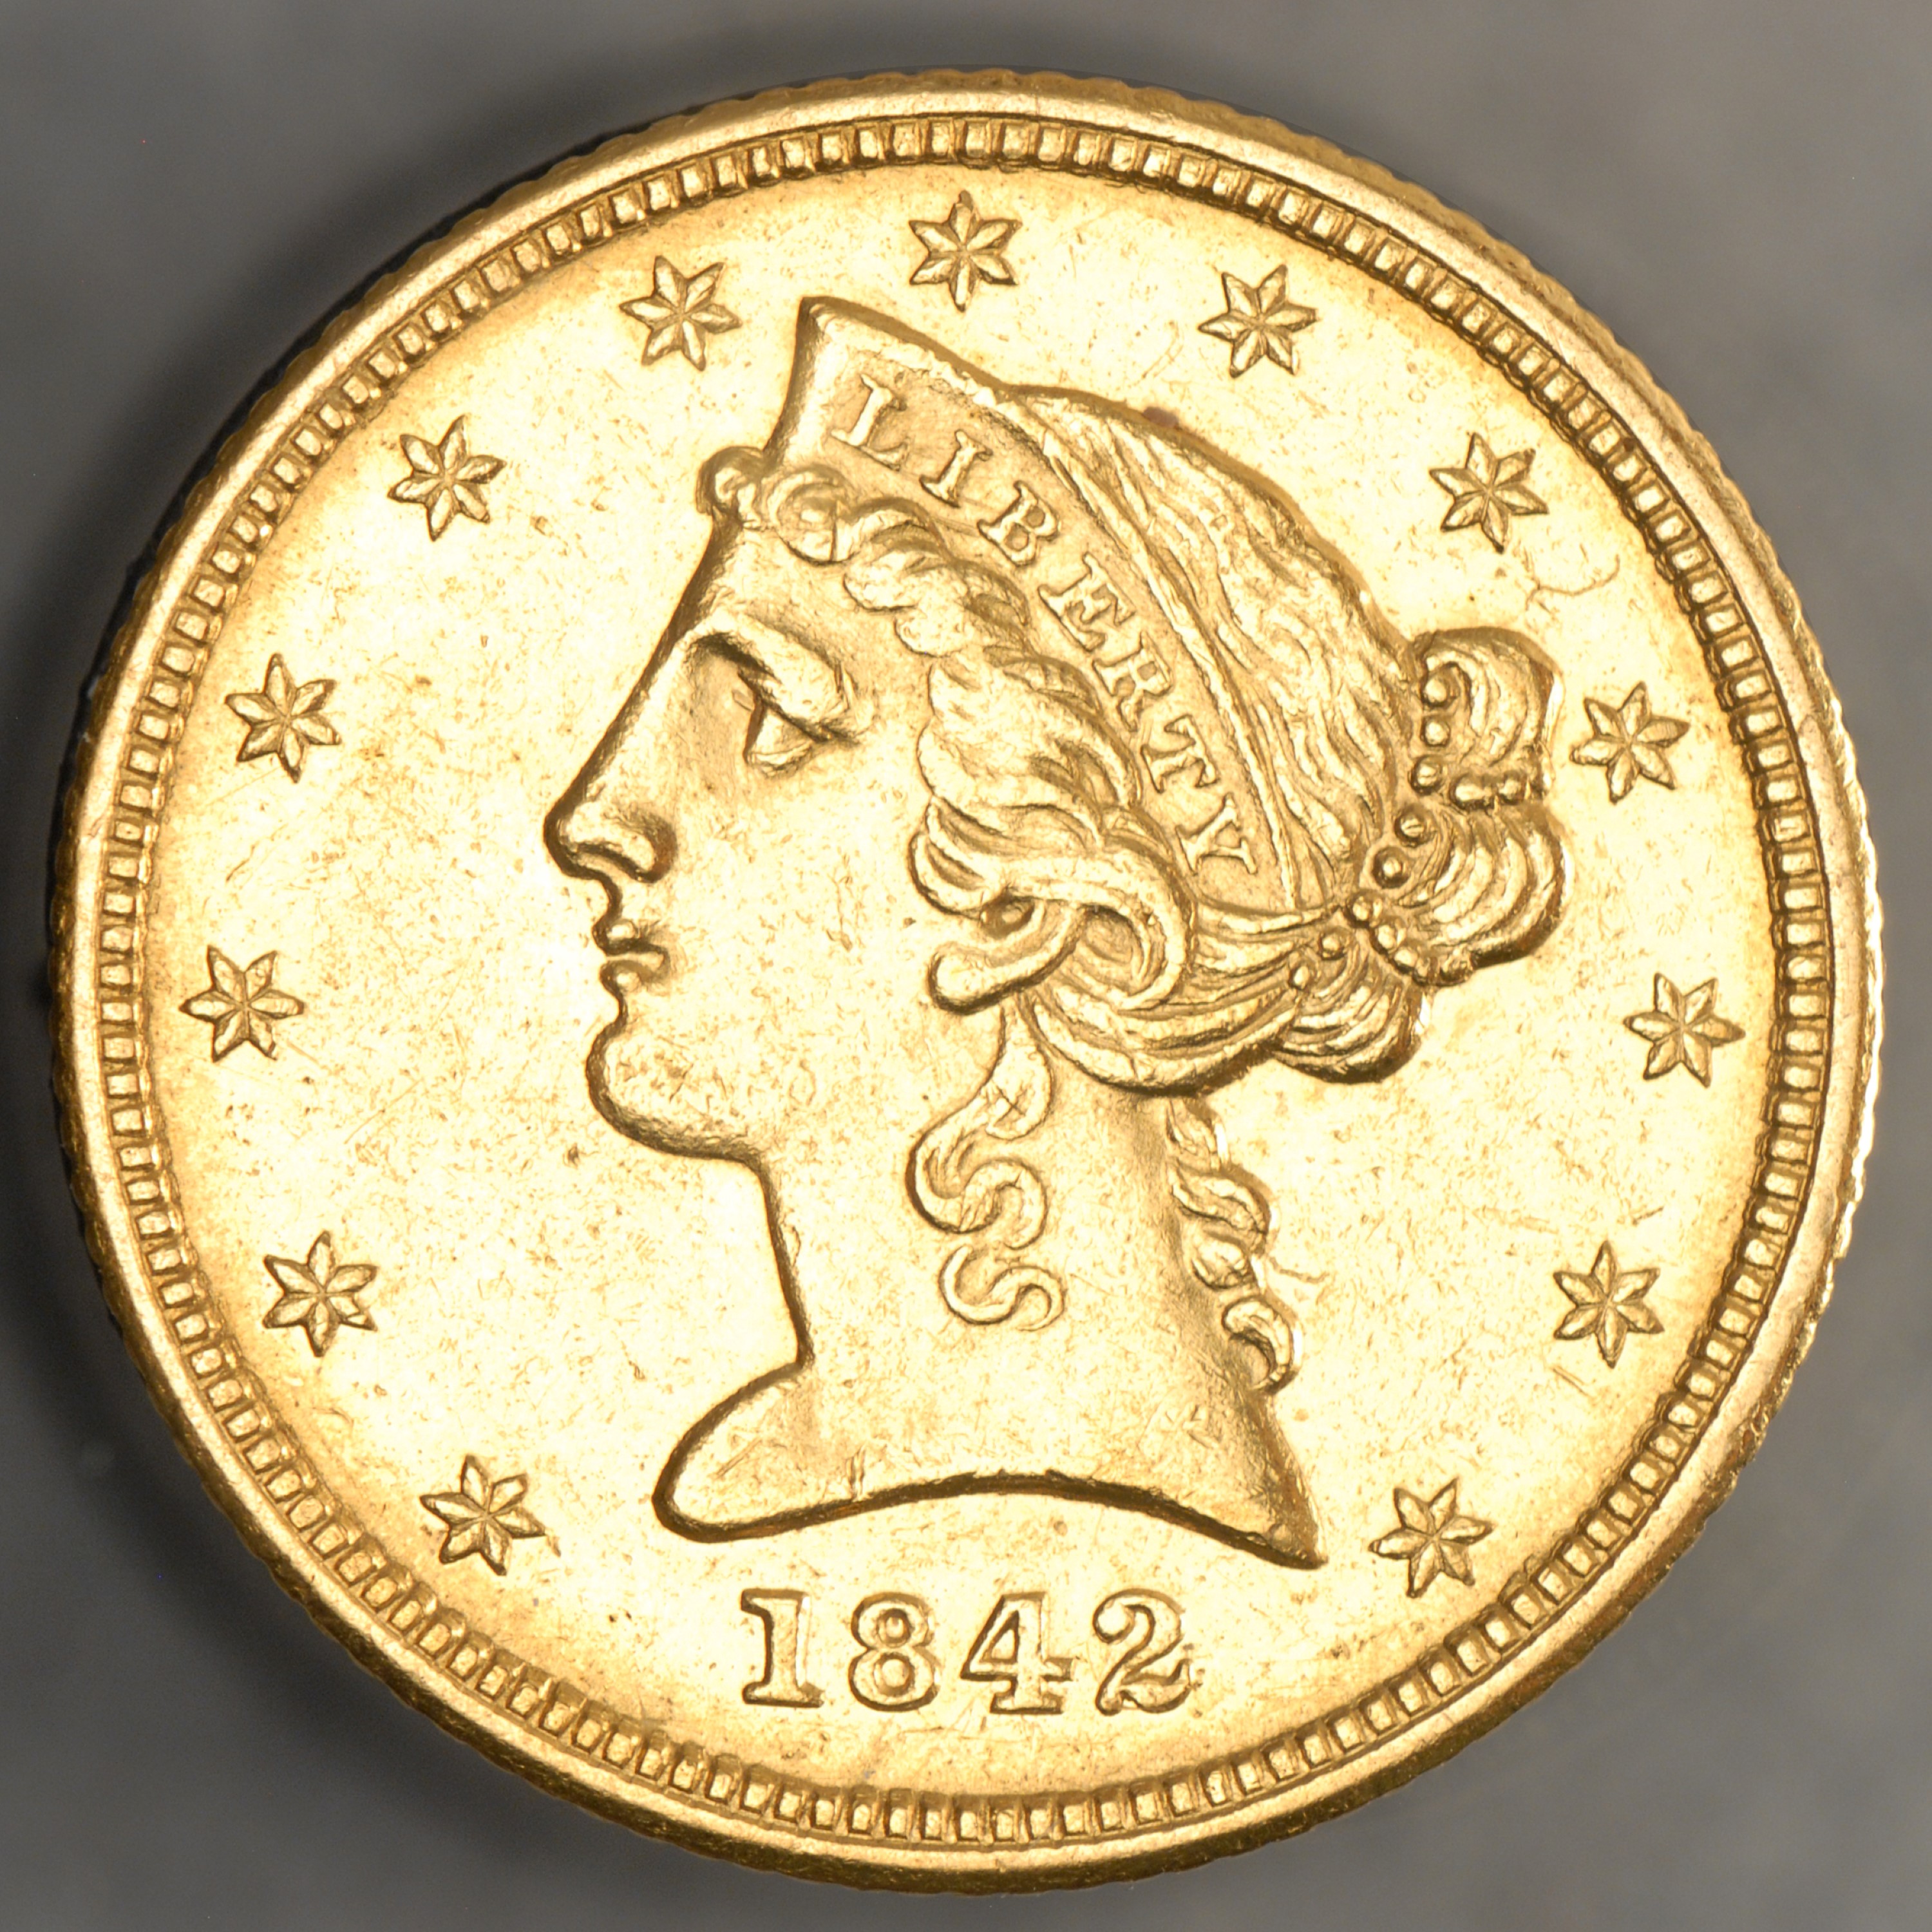 This $5 denomination gold coin was struck in 1842 in Dahlonega and will be displayed with other historic Georgia coins and paper money at the National Money Show in Atlanta.